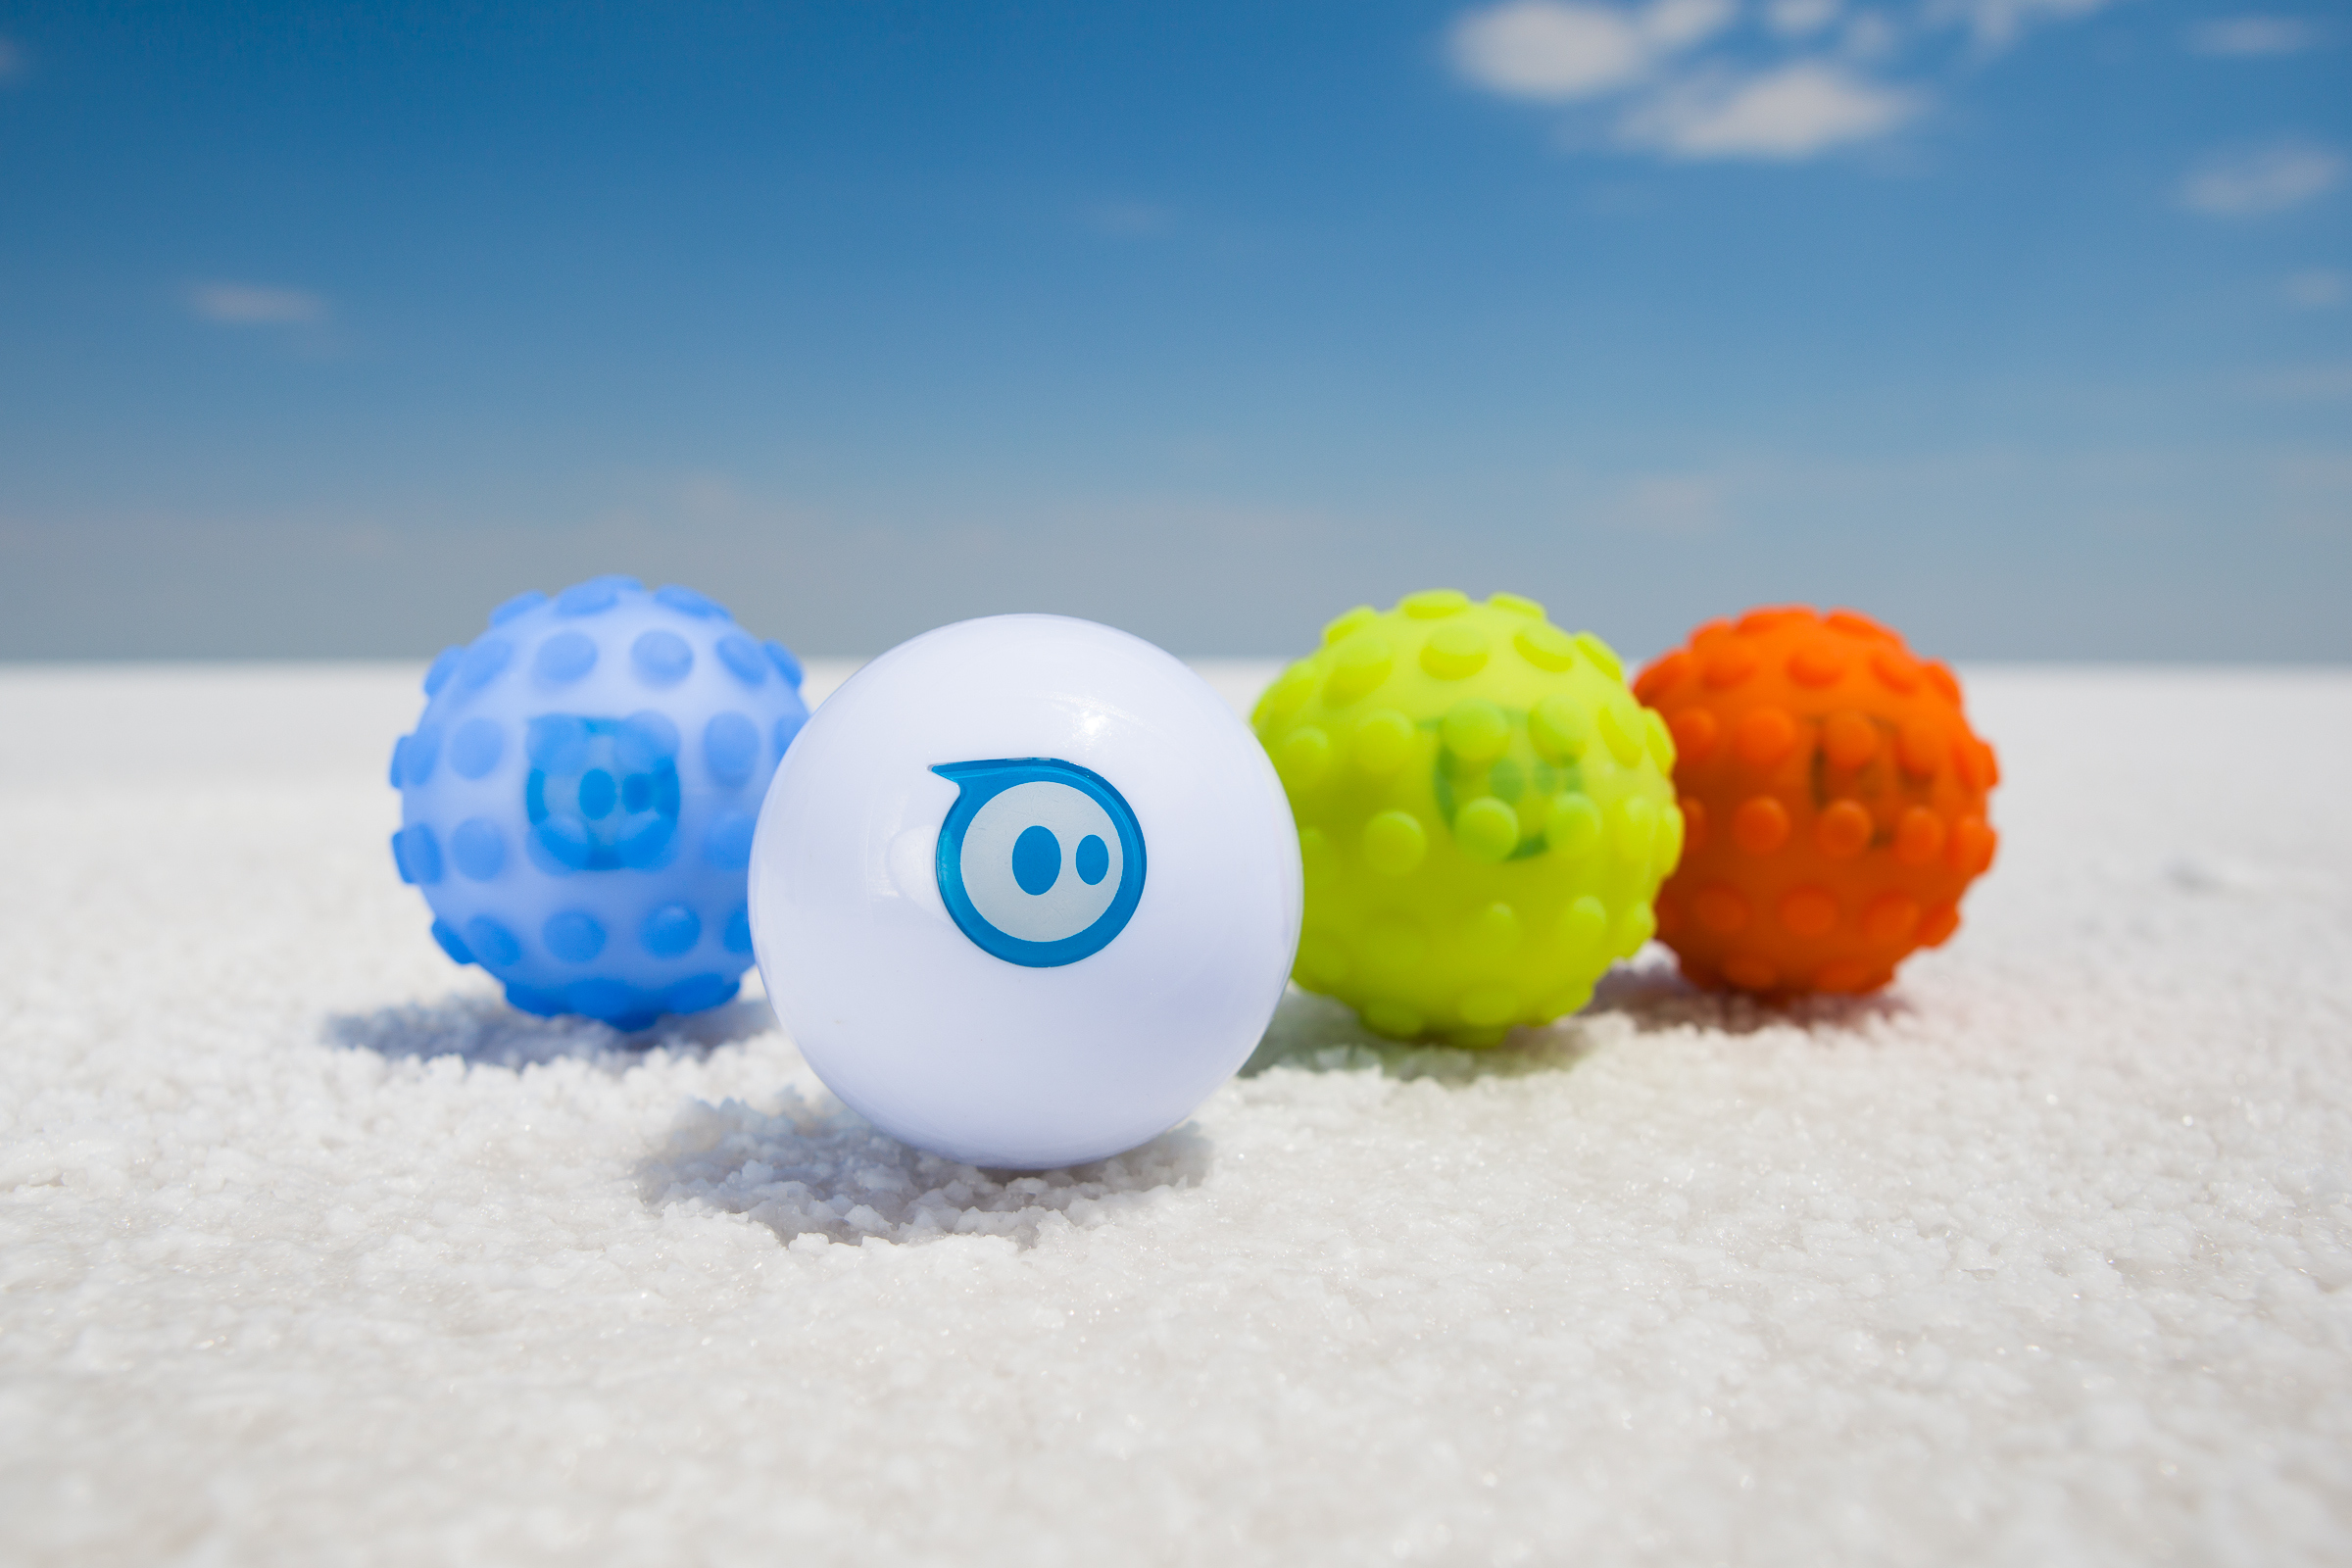 Geek insider, geekinsider, geekinsider. Com,, sphero 2. 0: the infamous robotic ball revamped, uncategorized